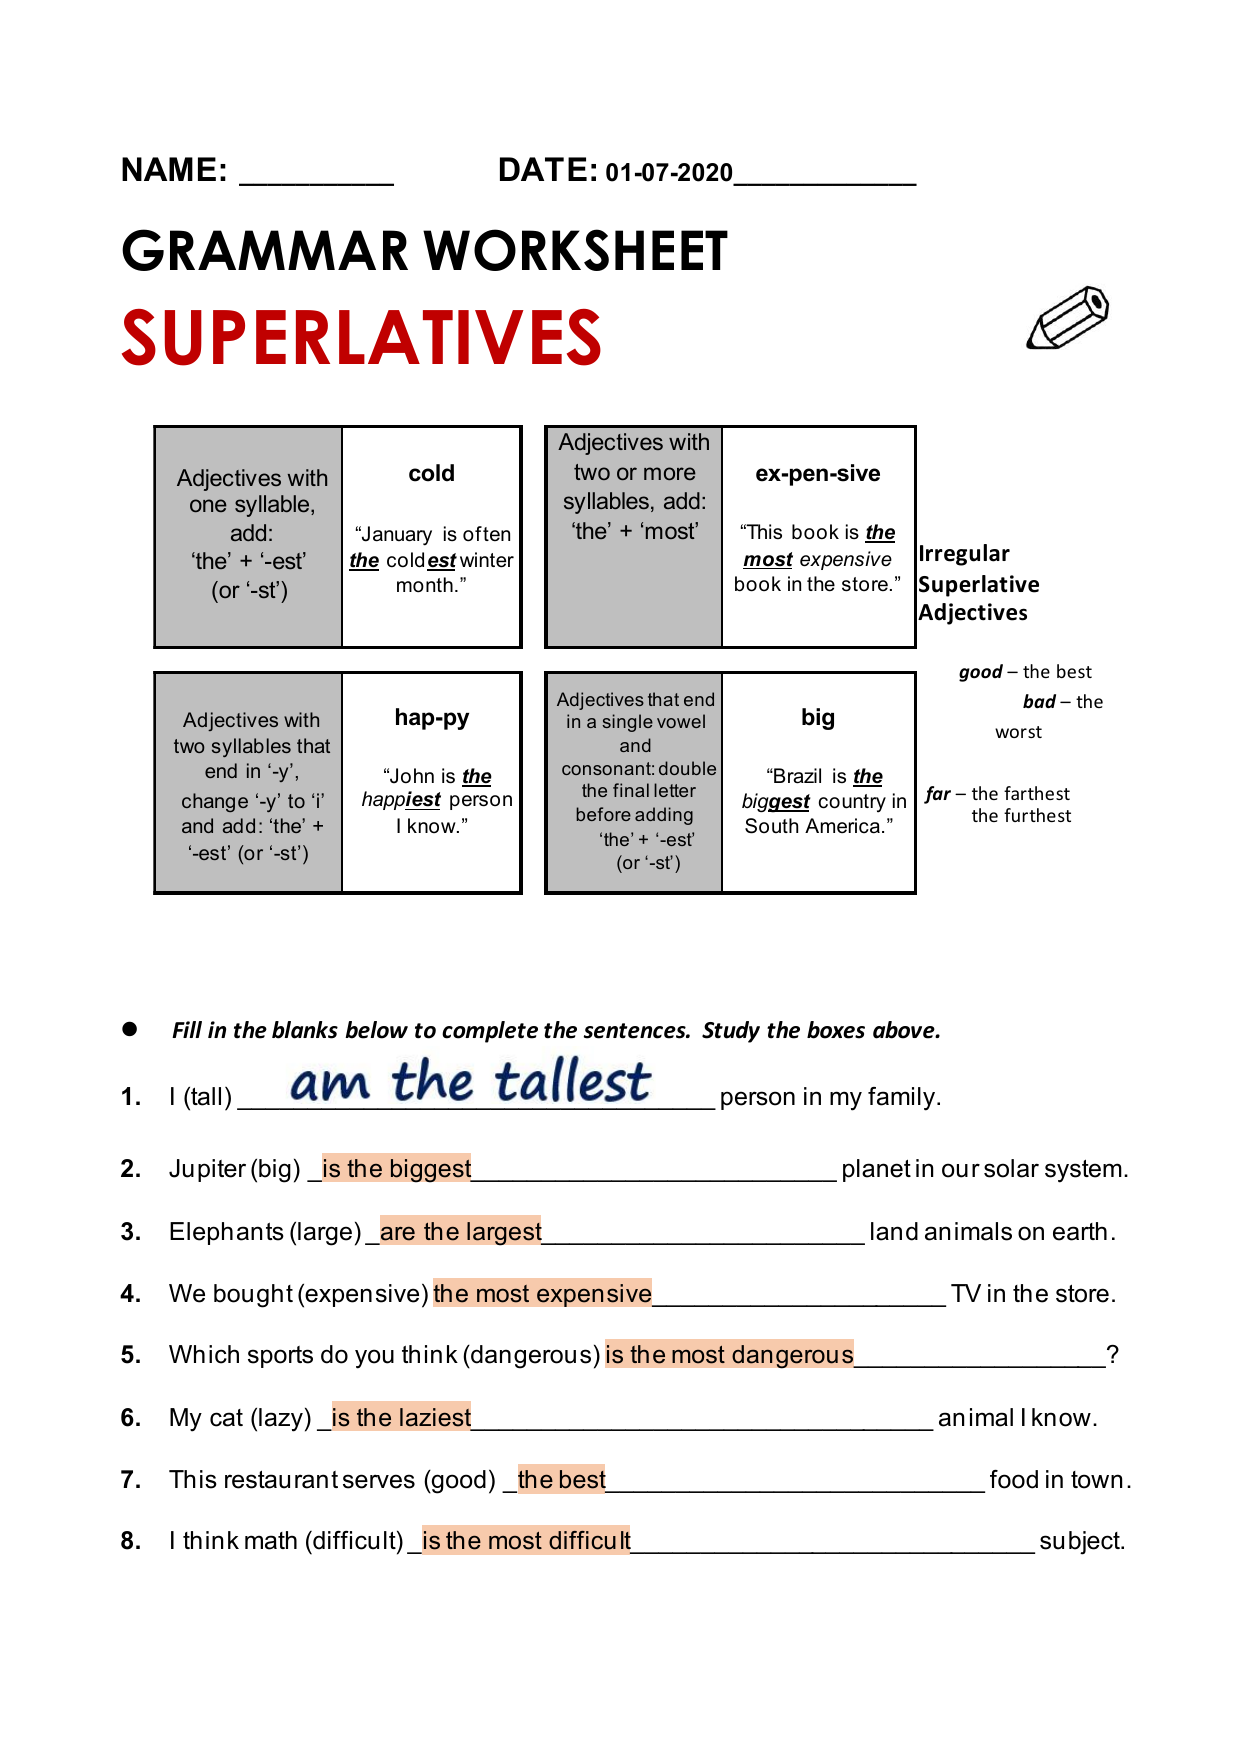 comparatives-interactive-worksheet-in-2020-superlative-adjectives-images